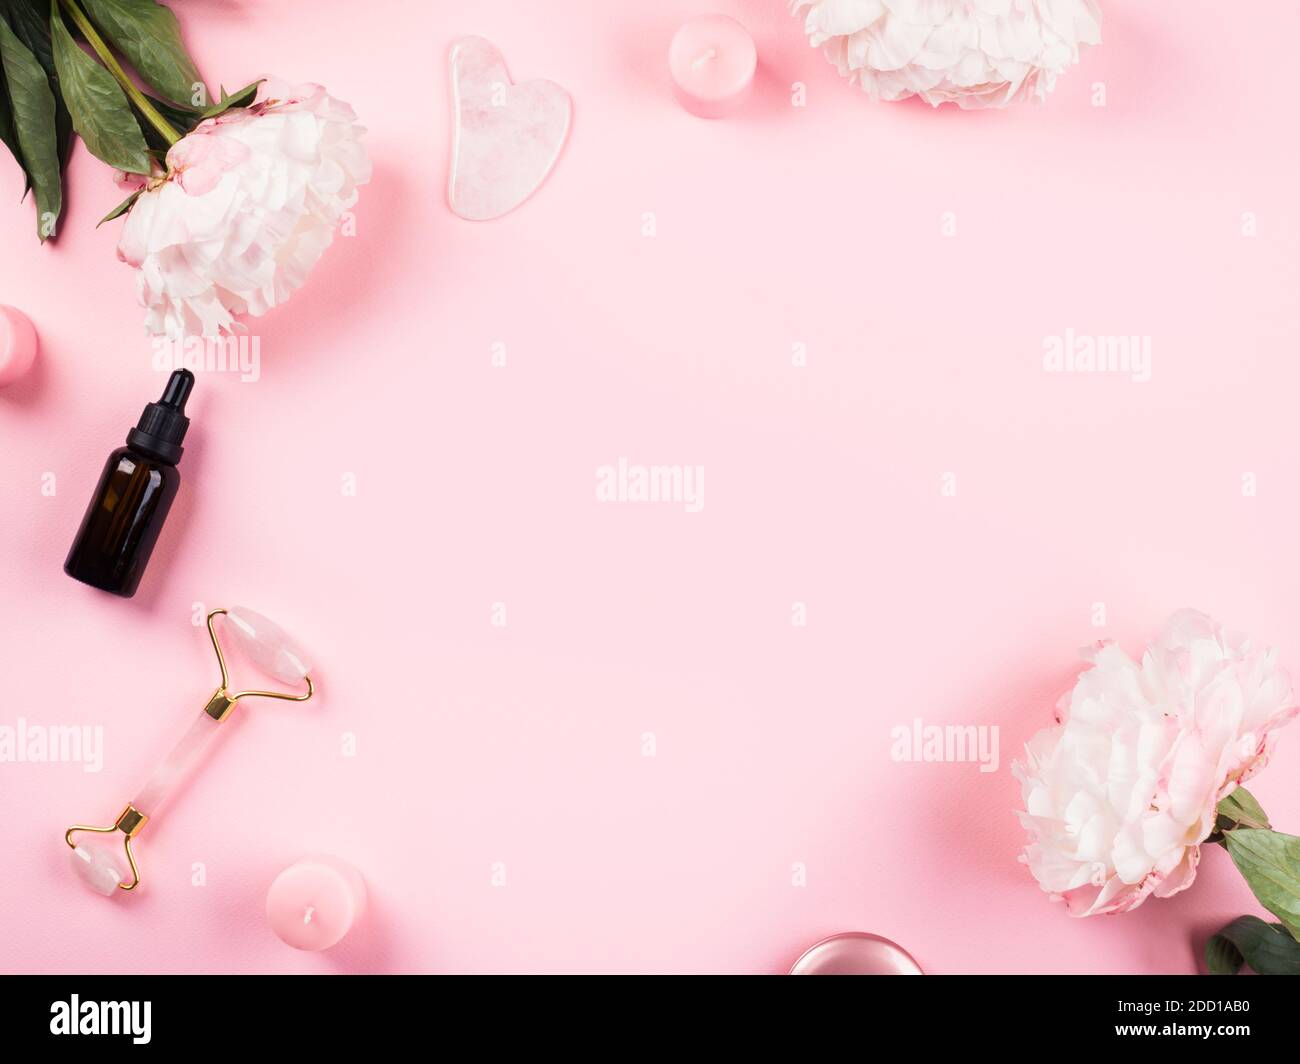 Pink beauty skin care background with flowers Stock Photo - Alamy